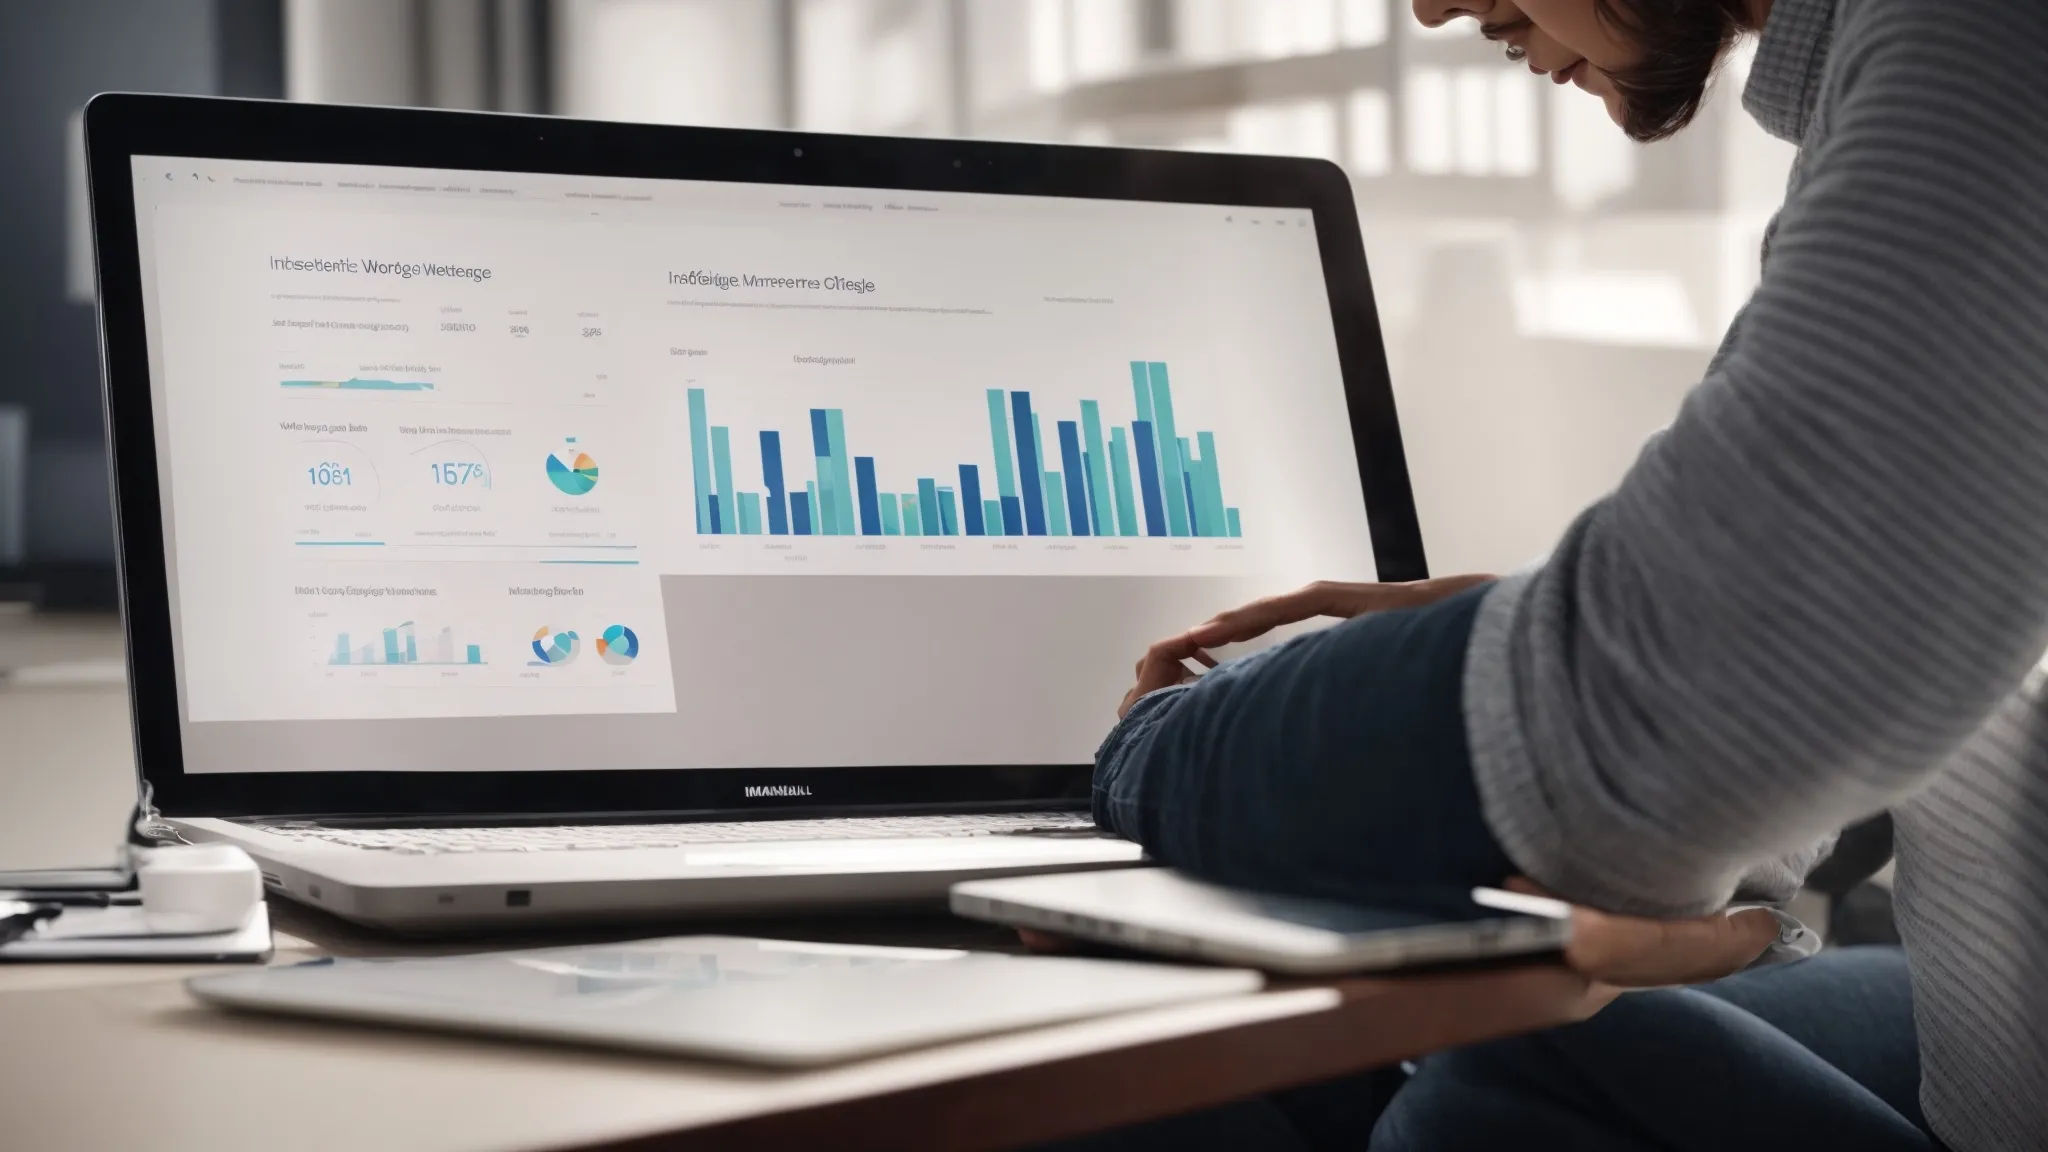 a marketer examines a laptop screen showing rising analytics graphs that illustrate the shifting trends in internet marketing strategies due to the influence of google's search plus your world.